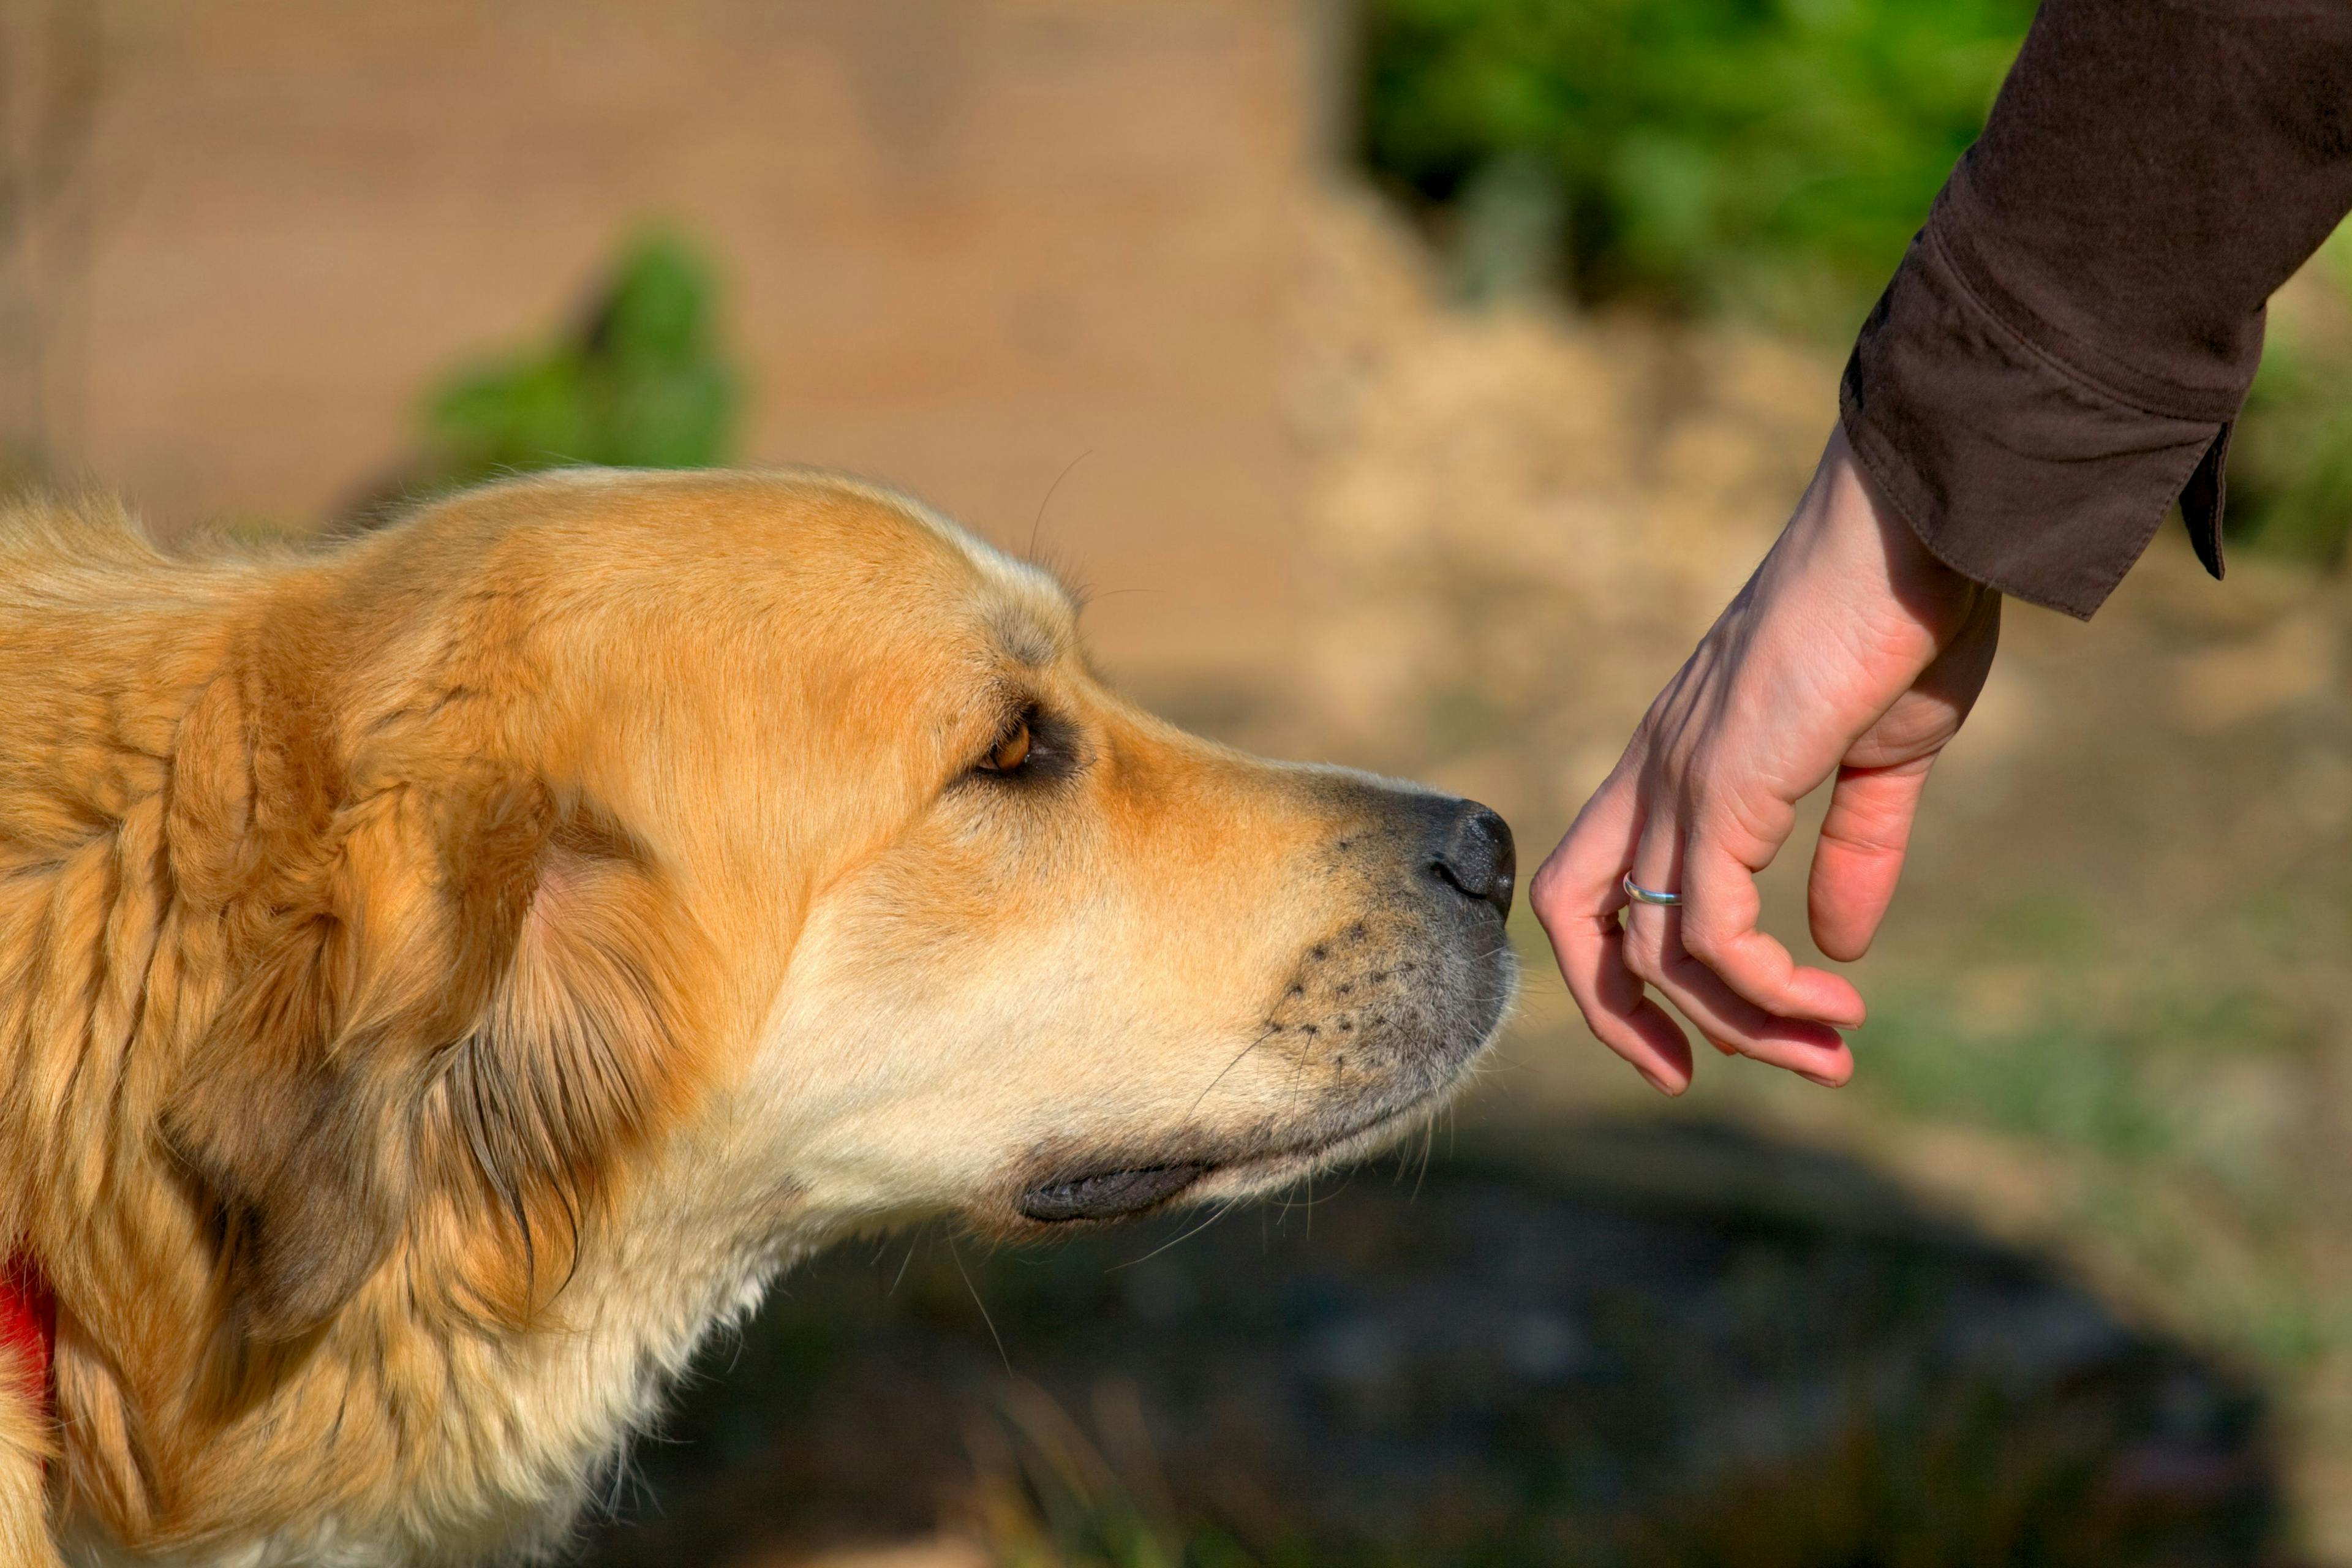 5 Safety tips for National Dog Bite Prevention Week that clients need to hear